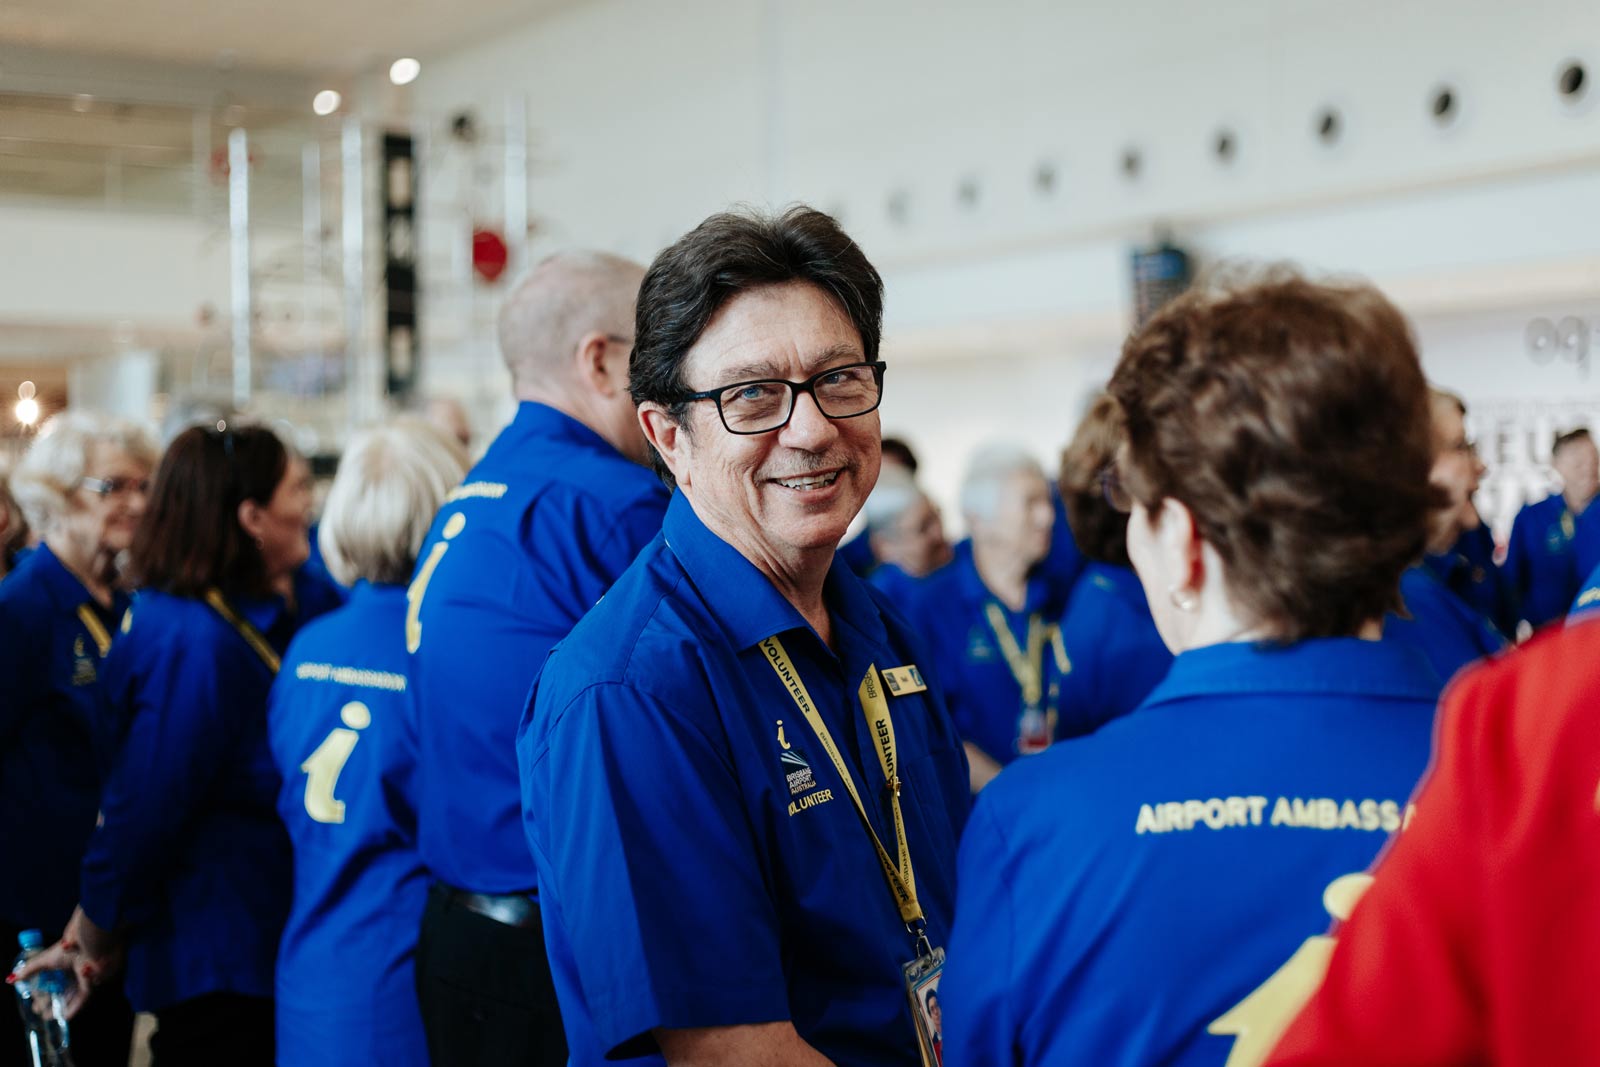 Our Airport Ambassadors are here to help